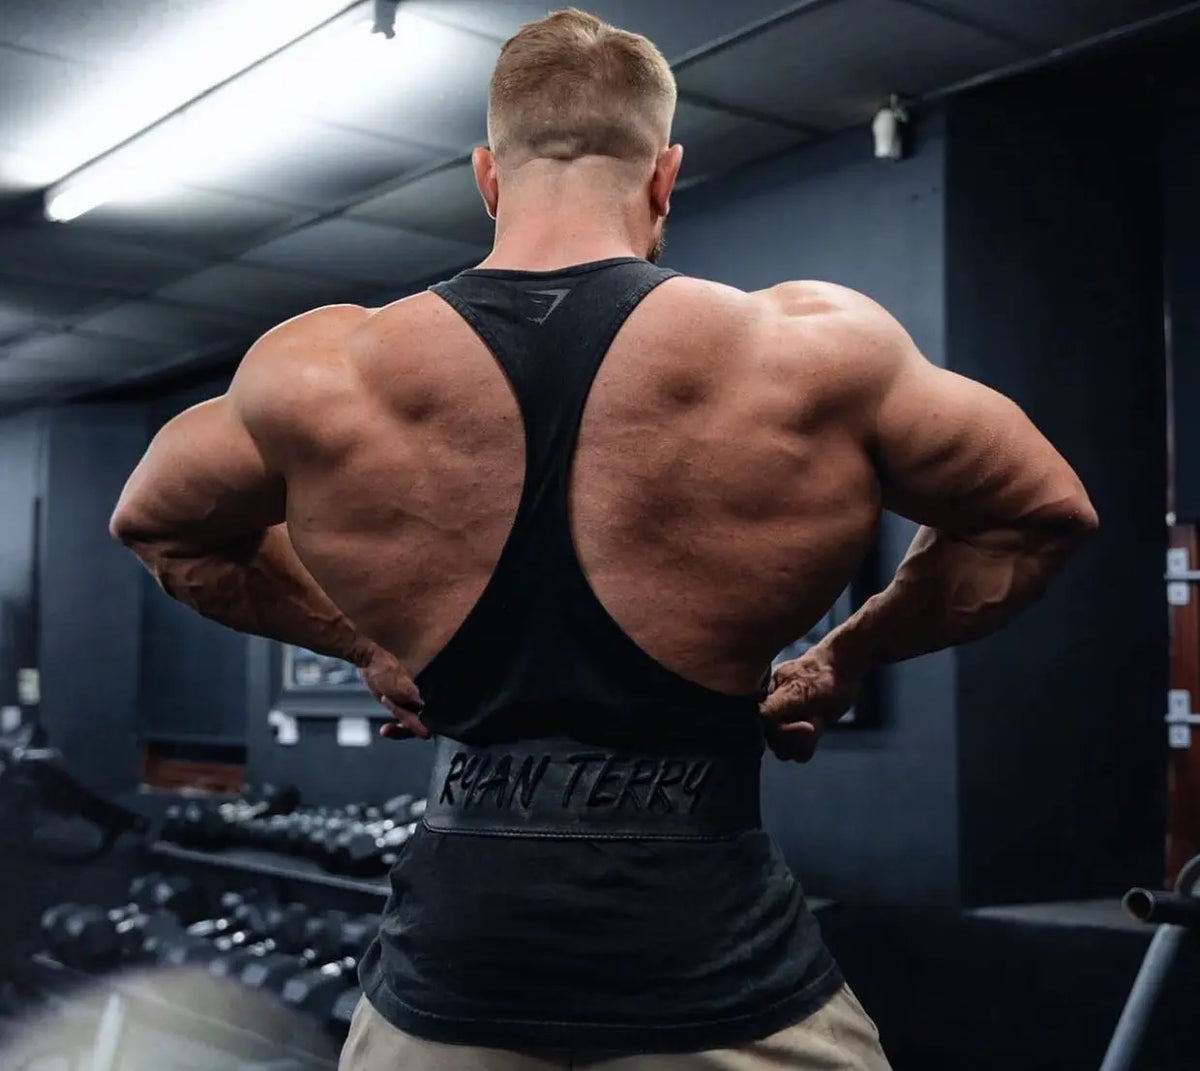 As a bodybuilder, how would one develop wide lateral and chest